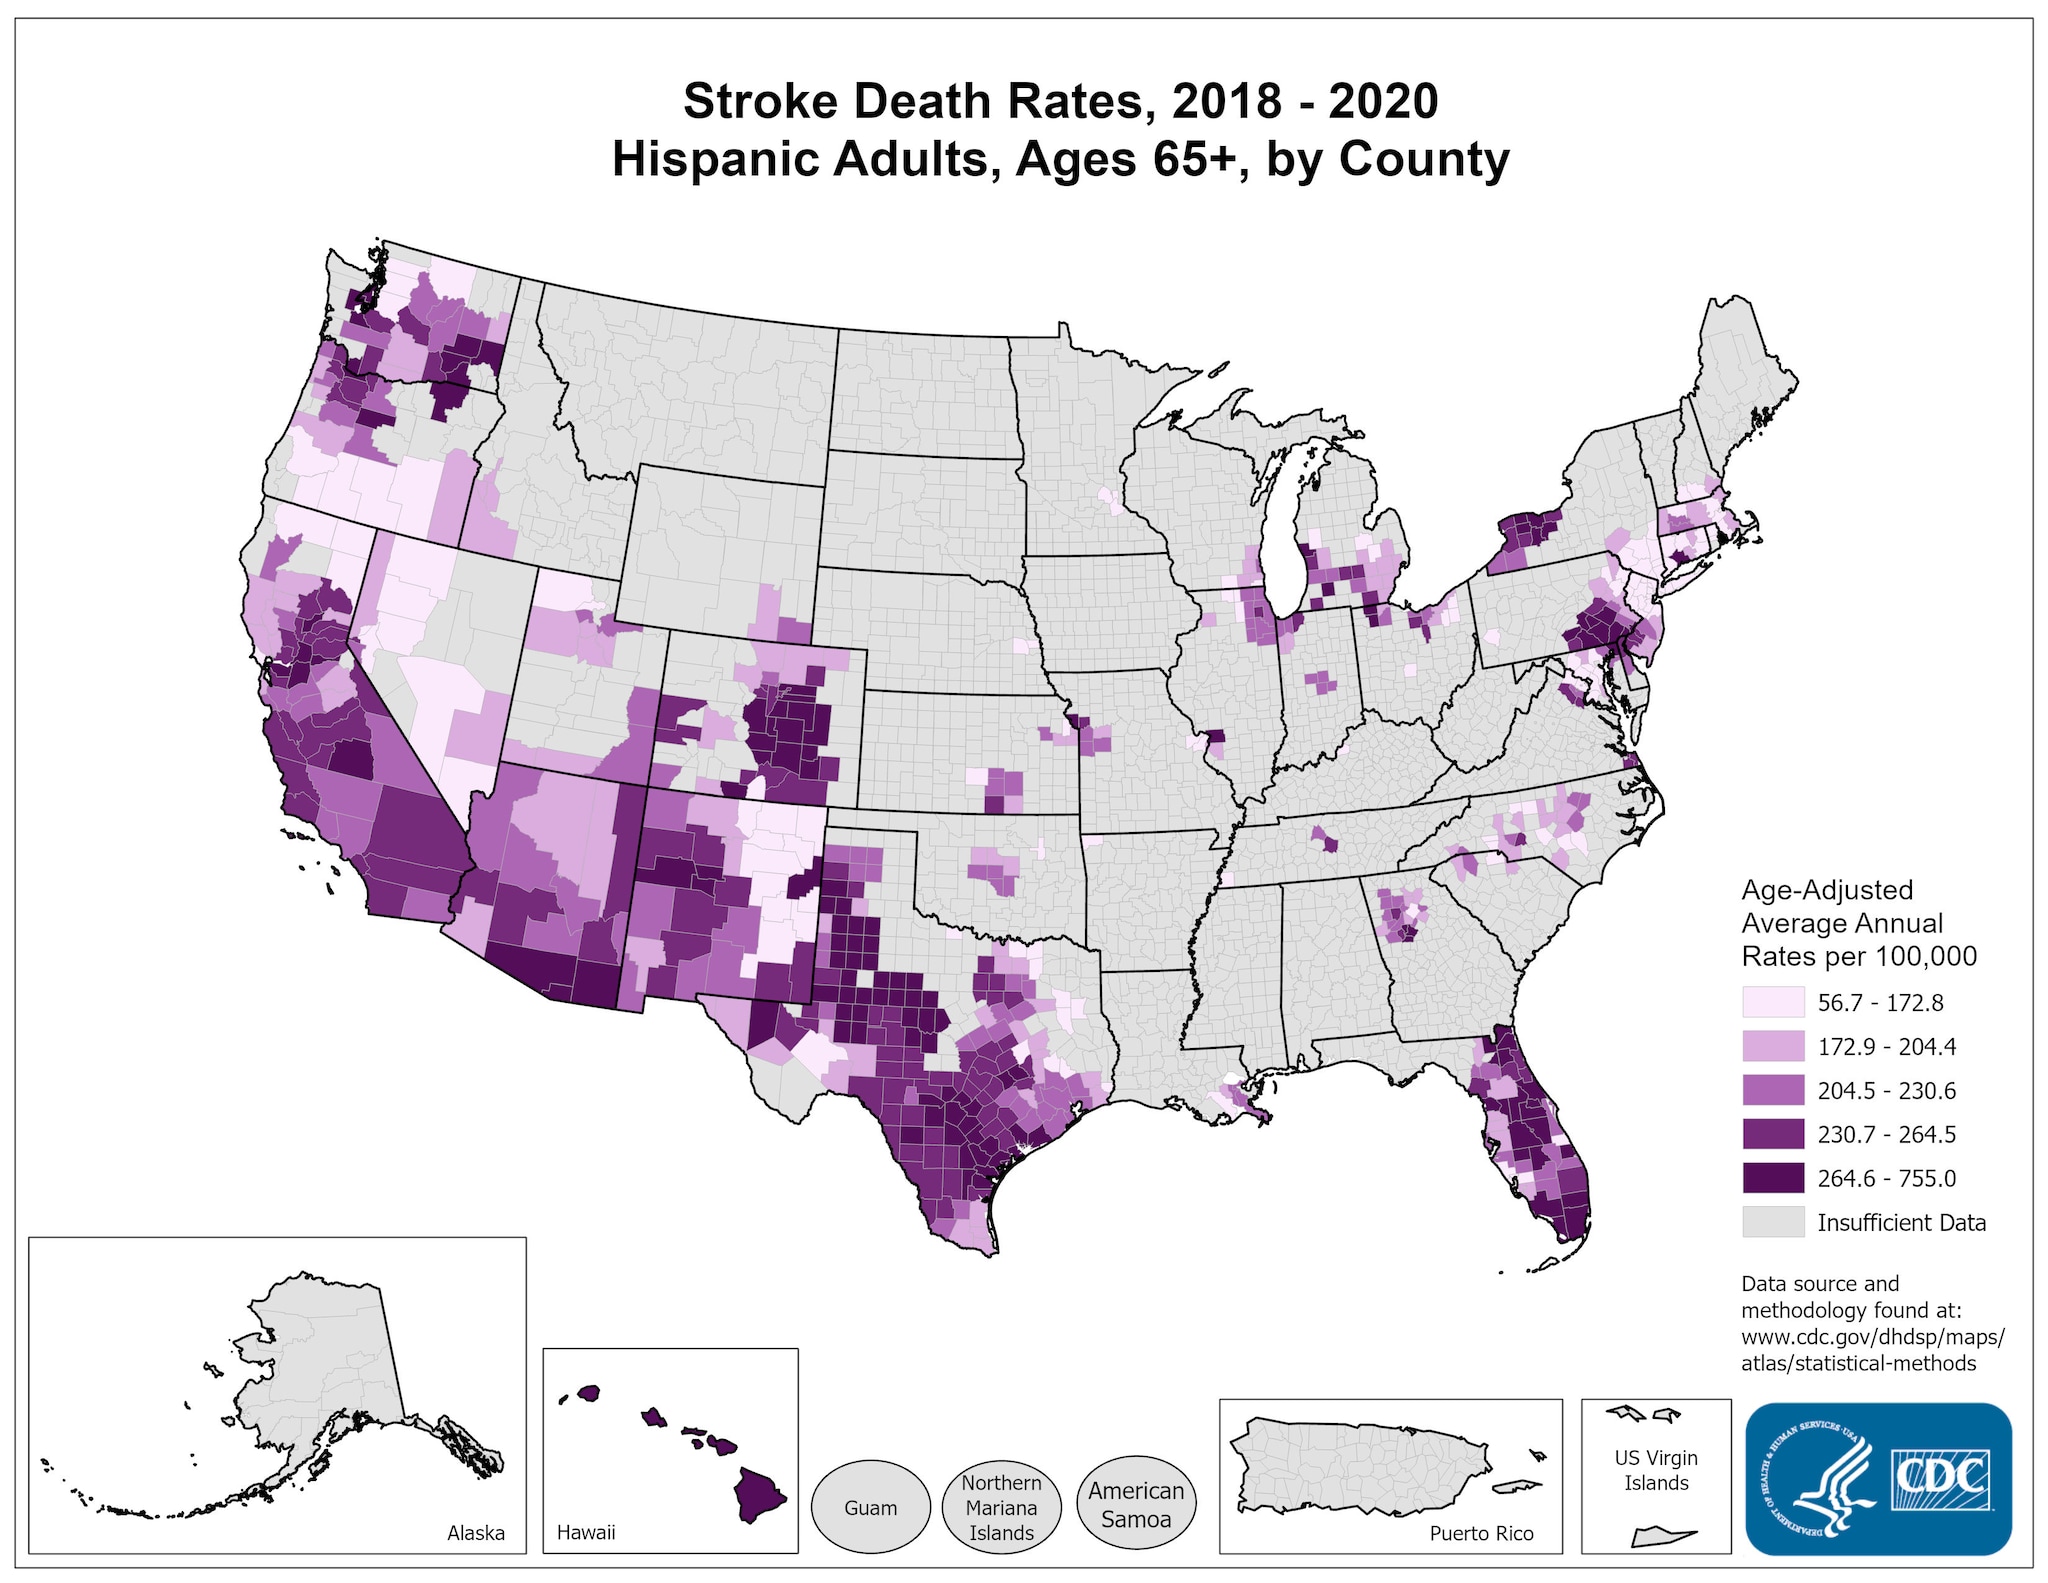 Stroke Death Rates for 2014 through 2016 for Hispanics Aged 65 Years and Older by County. The map shows that concentrations of counties with the highest stroke death rates - meaning the top quintile - are located primarily in Hawaii, Texas, and parts of Colorado and Pennsylvania. Pockets of high-rate counties are also found in California and Michigan. 